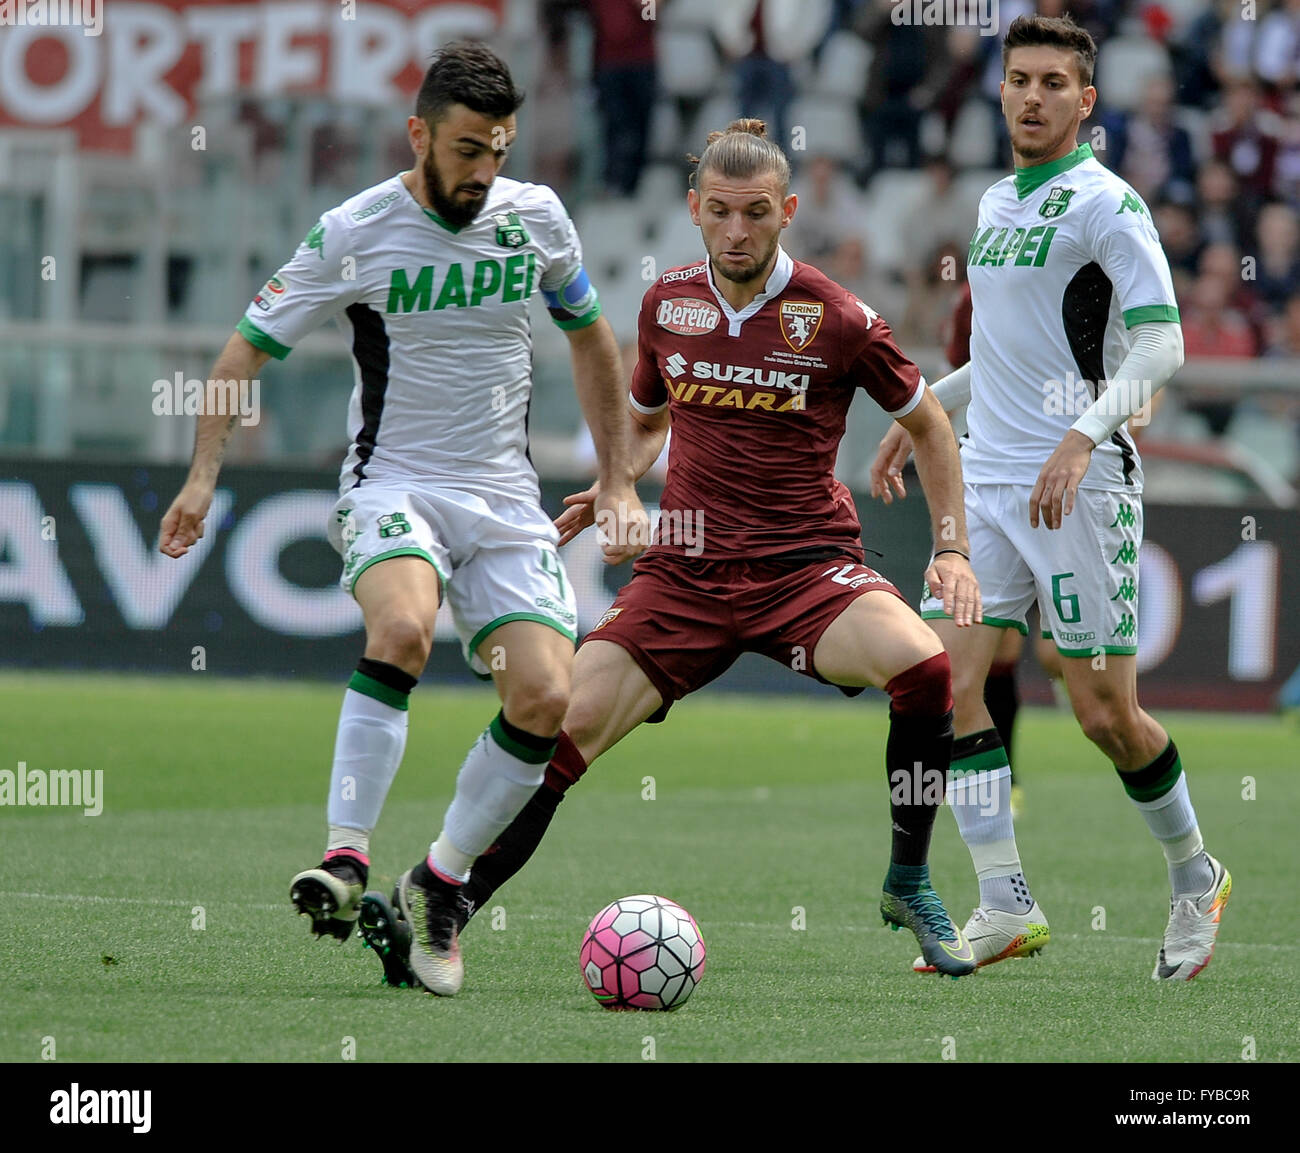 Turin, Italy. 24th Apr, 2016. Francesco Magnanelli (left) and Gaston Silva during the Serie A football match between Torino FC and US Sassuolo. US Sassuolo wins 3-1 over Torino FC. © Nicolò Campo/Pacific Press/Alamy Live News Stock Photo